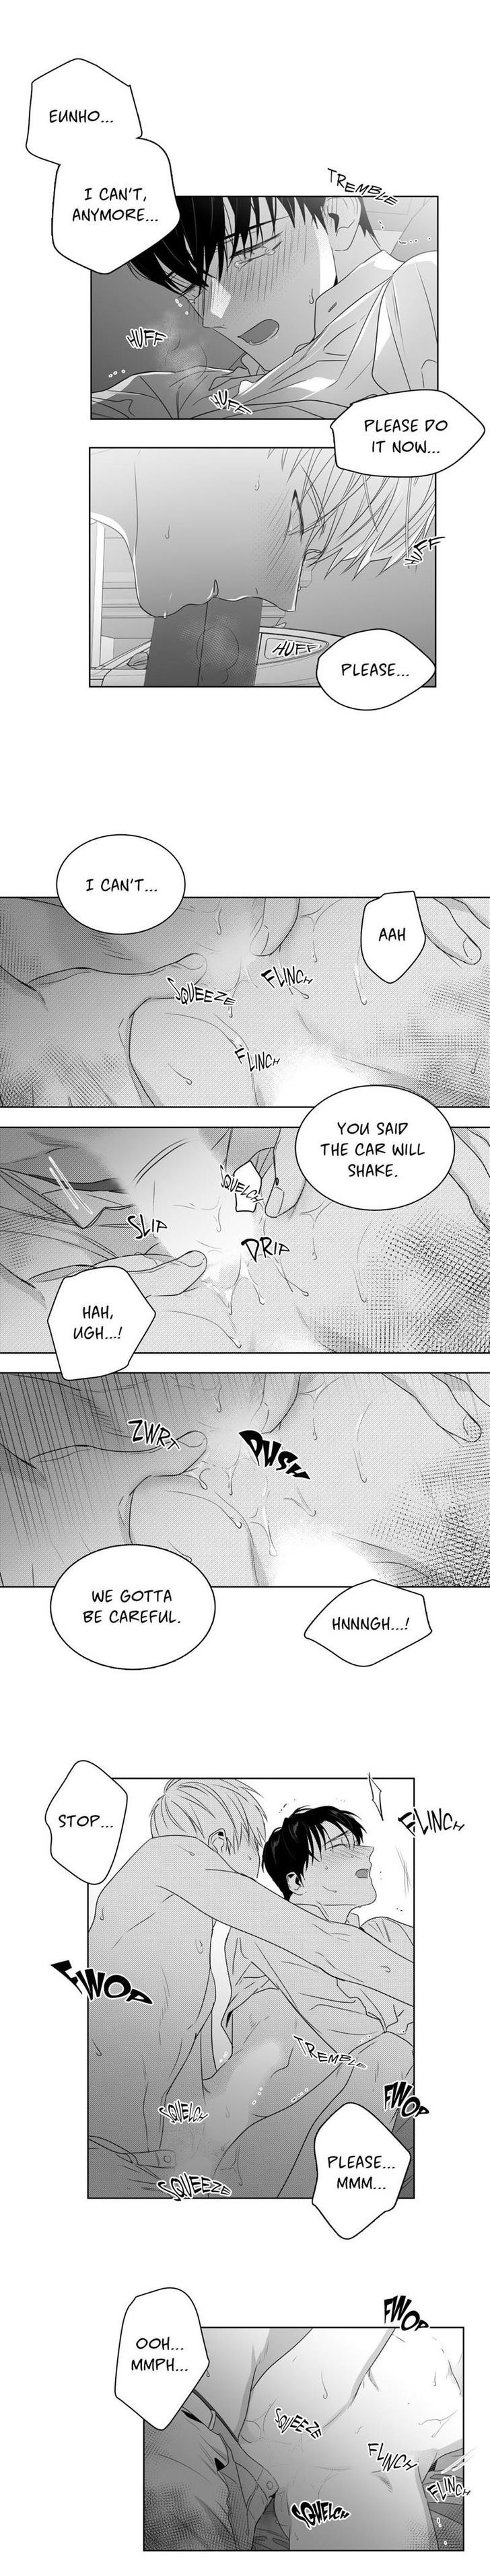 Lover Boy (Lezhin) Chapter 040 page 5